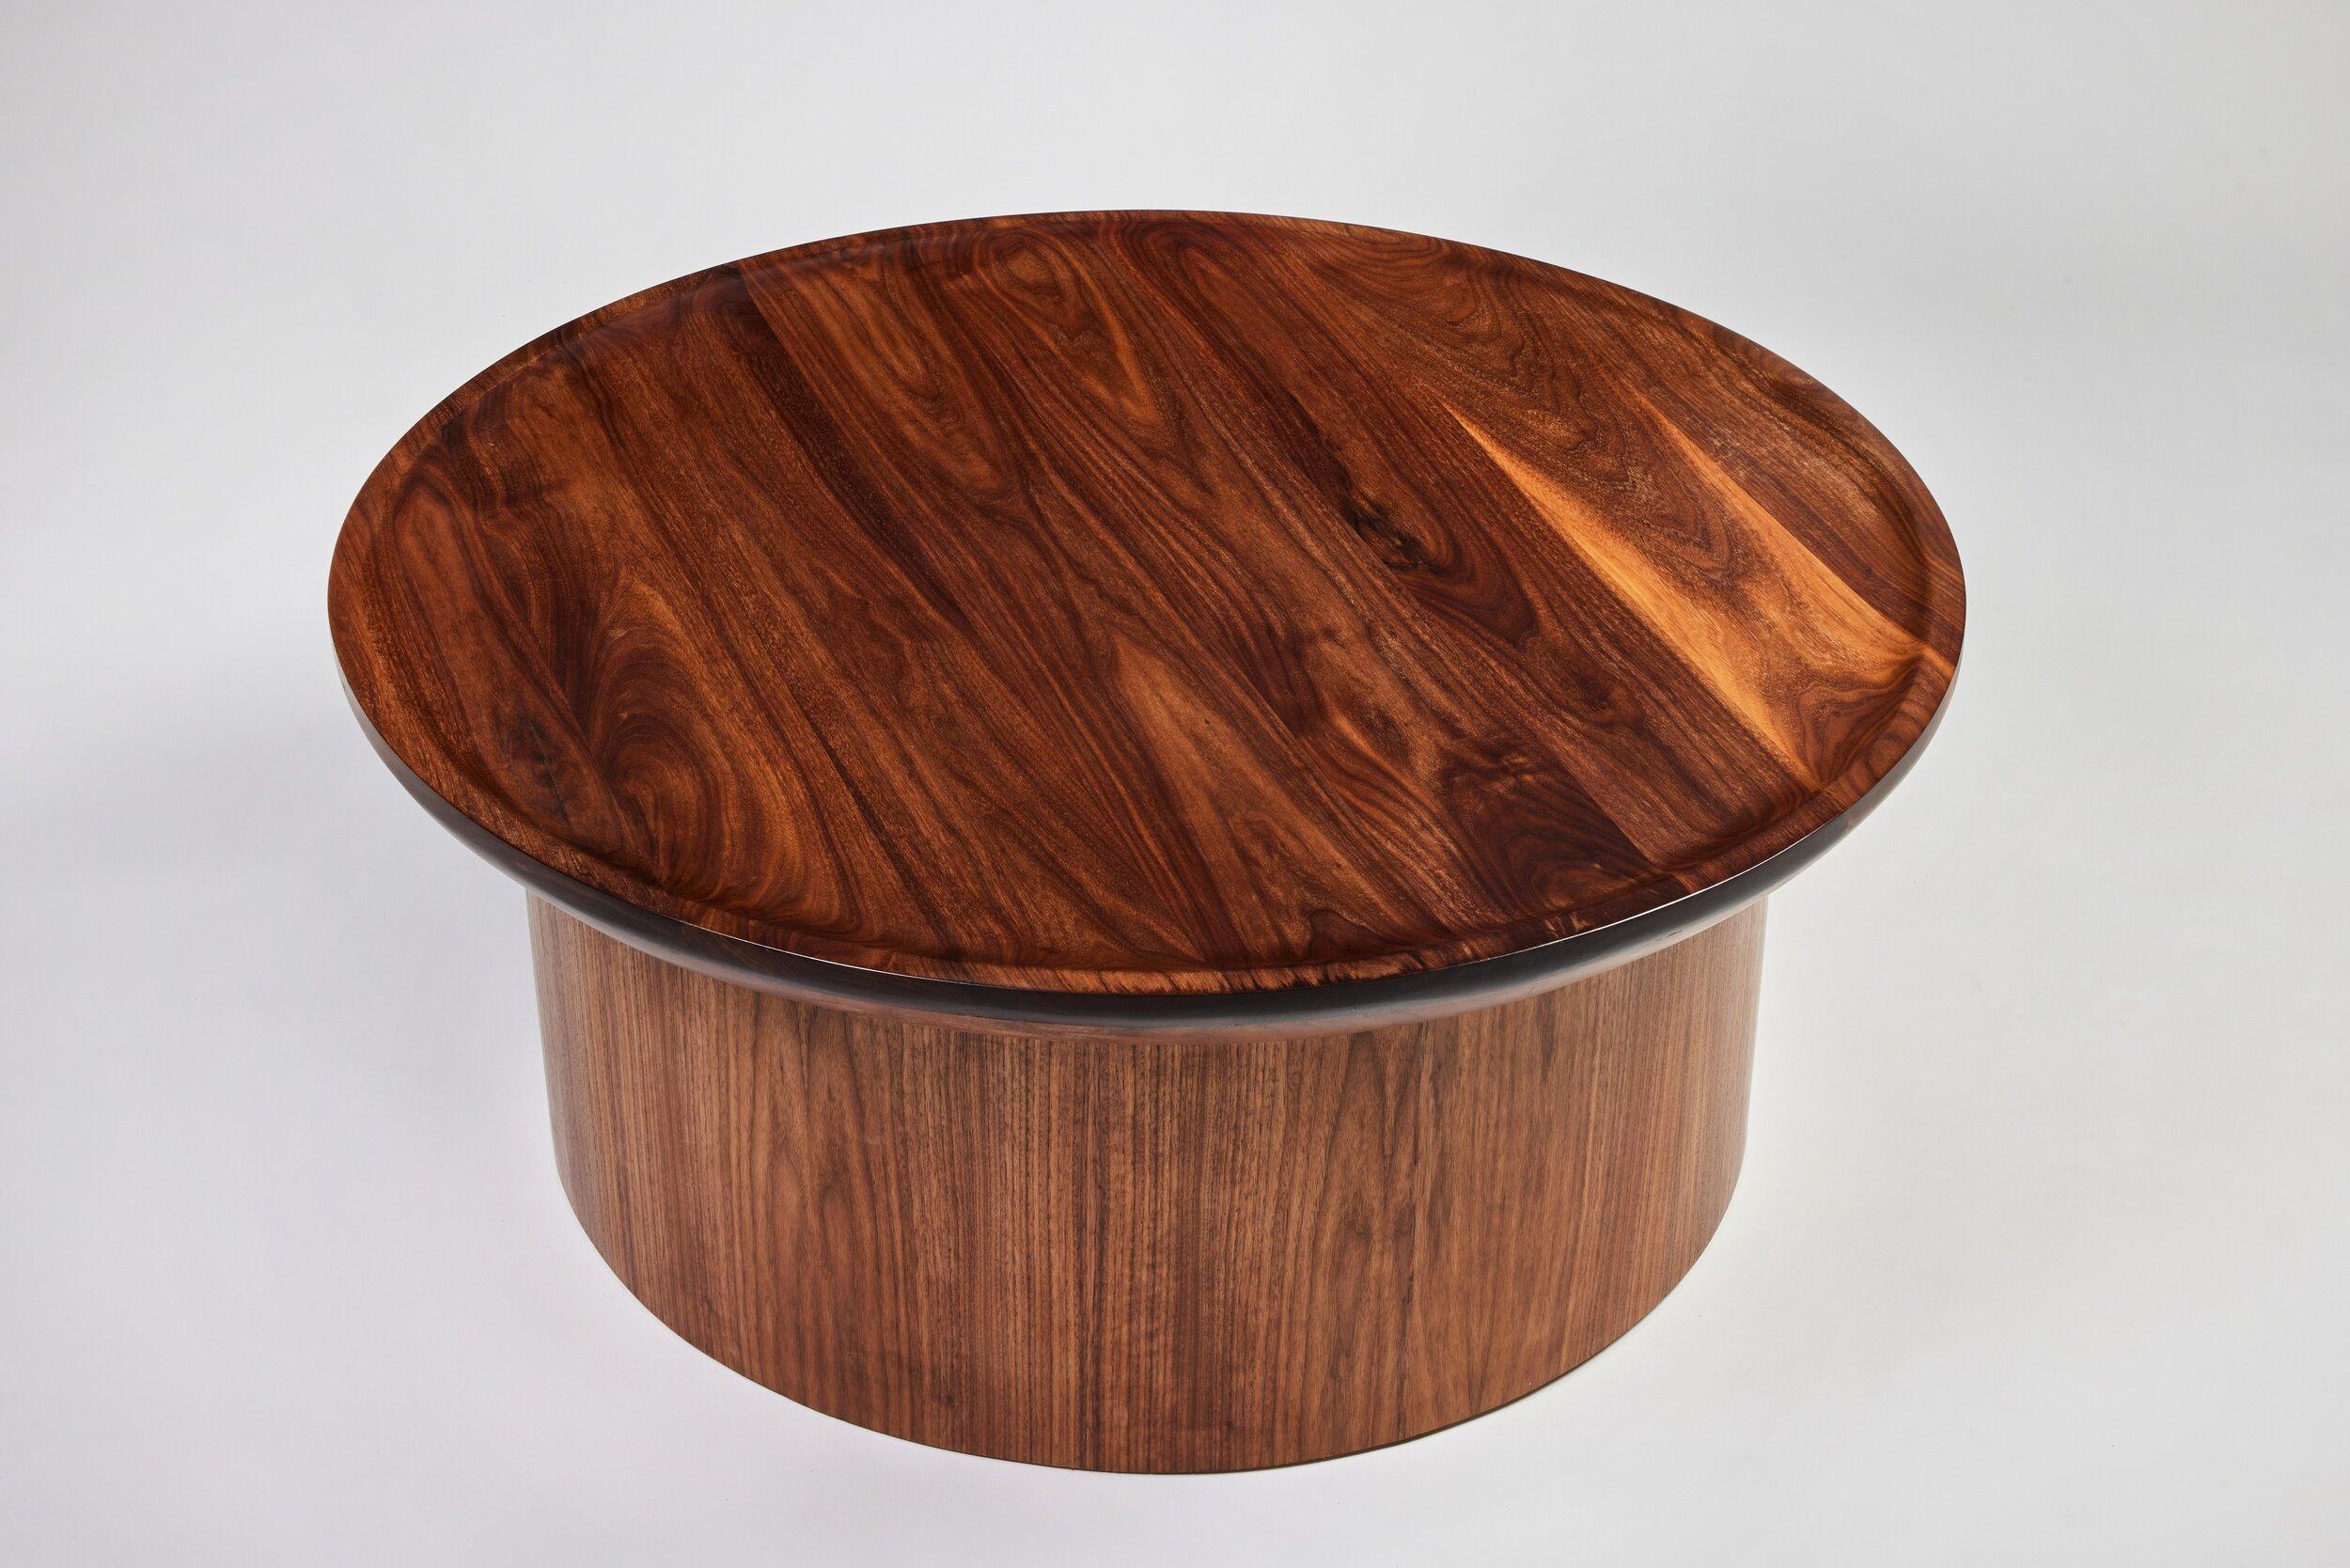 Martin & Brockett's Findley Round Coffee Table features the Findley Collection’s signature carved, curved lip and round pedestal base. Shown in Walnut 

H 17 in. x W 40 in. x D 40 in.

Available for order in additional finishes and sizing.

Part of